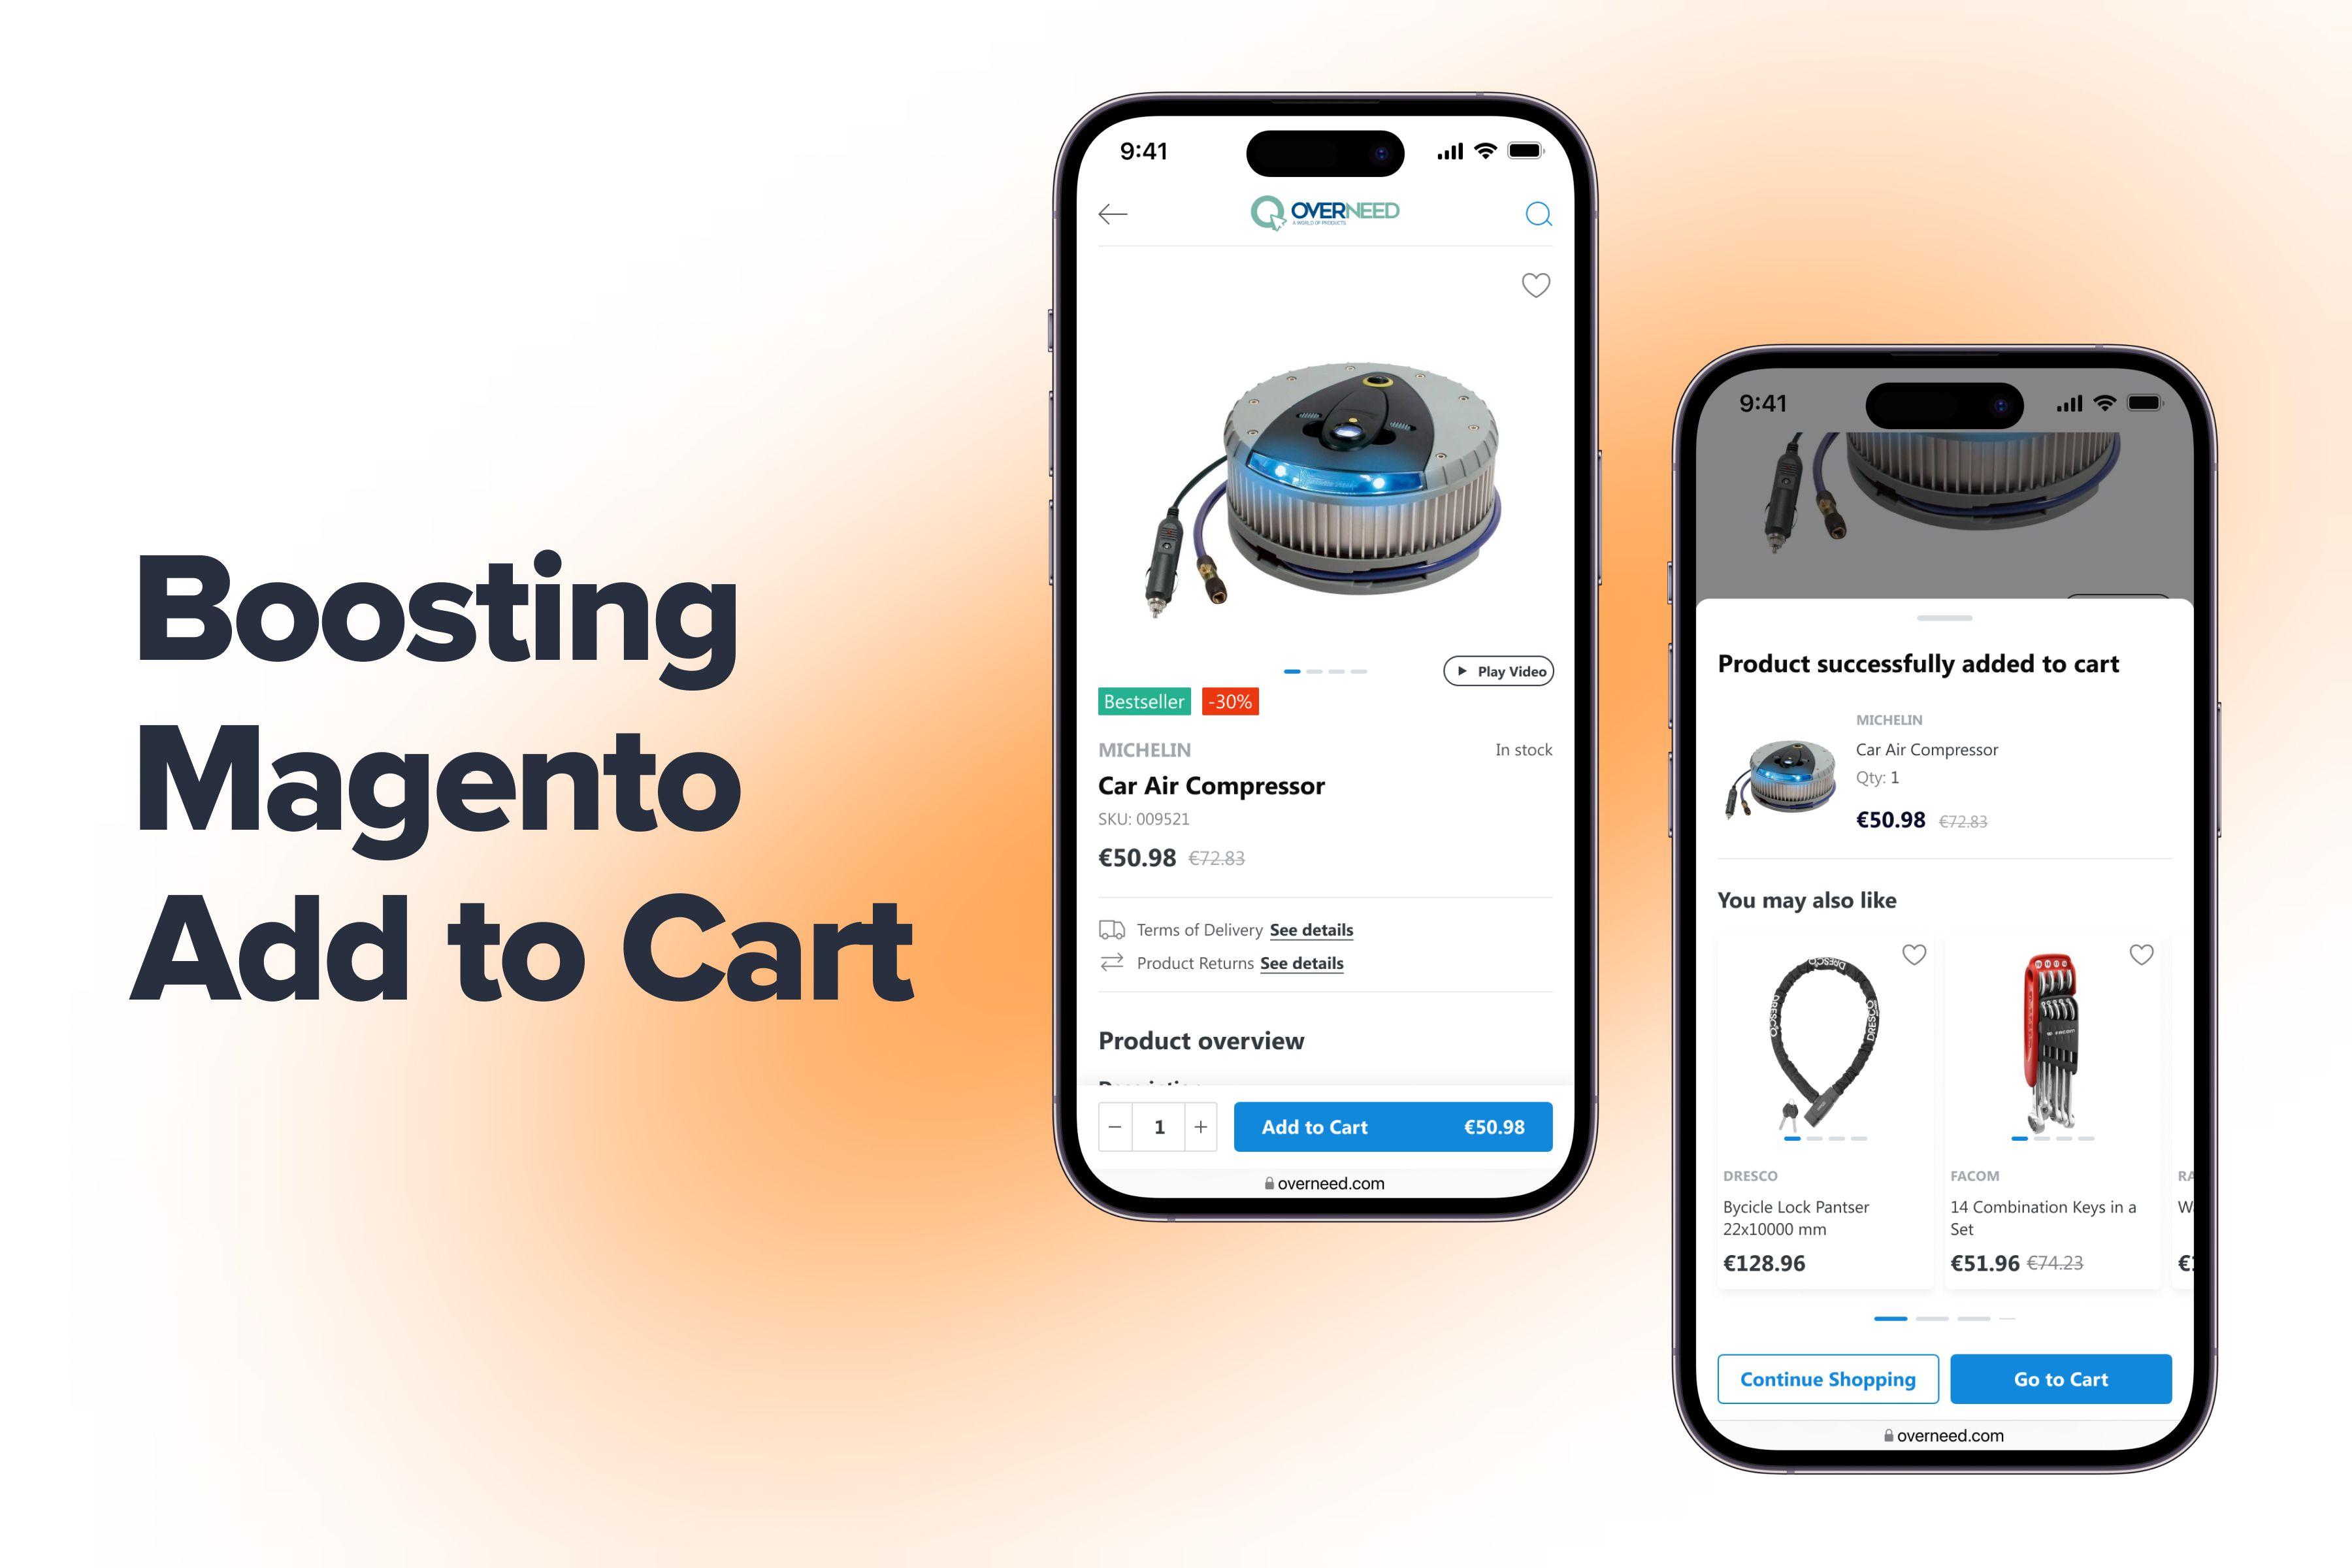 Boosting Magento Add to Cart